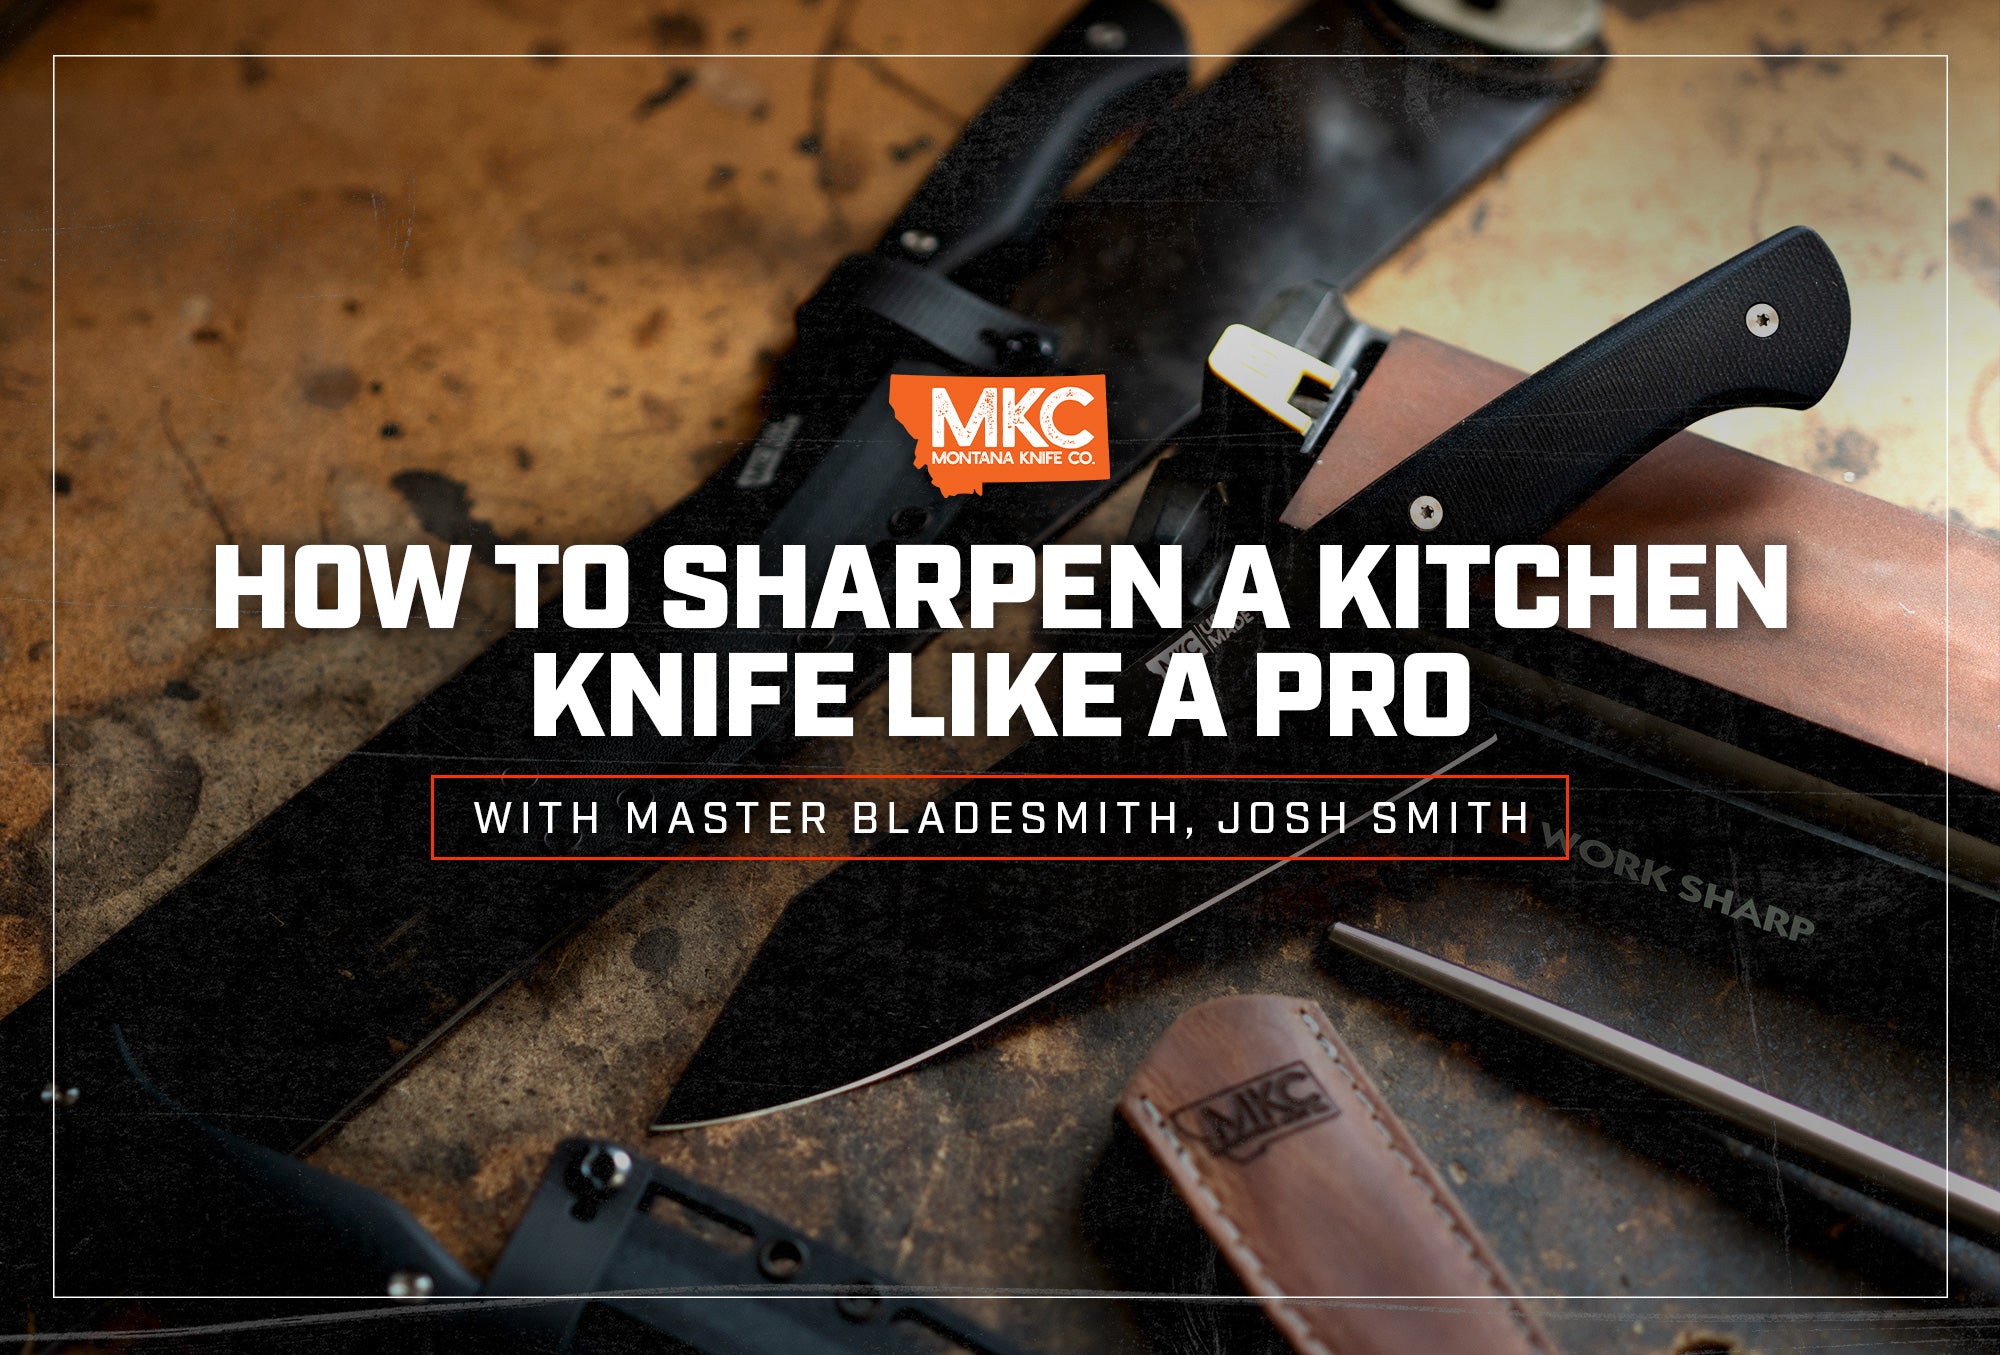 Three kitchen knives lie scattered around a Work Sharp whetstone and a leather sheath.